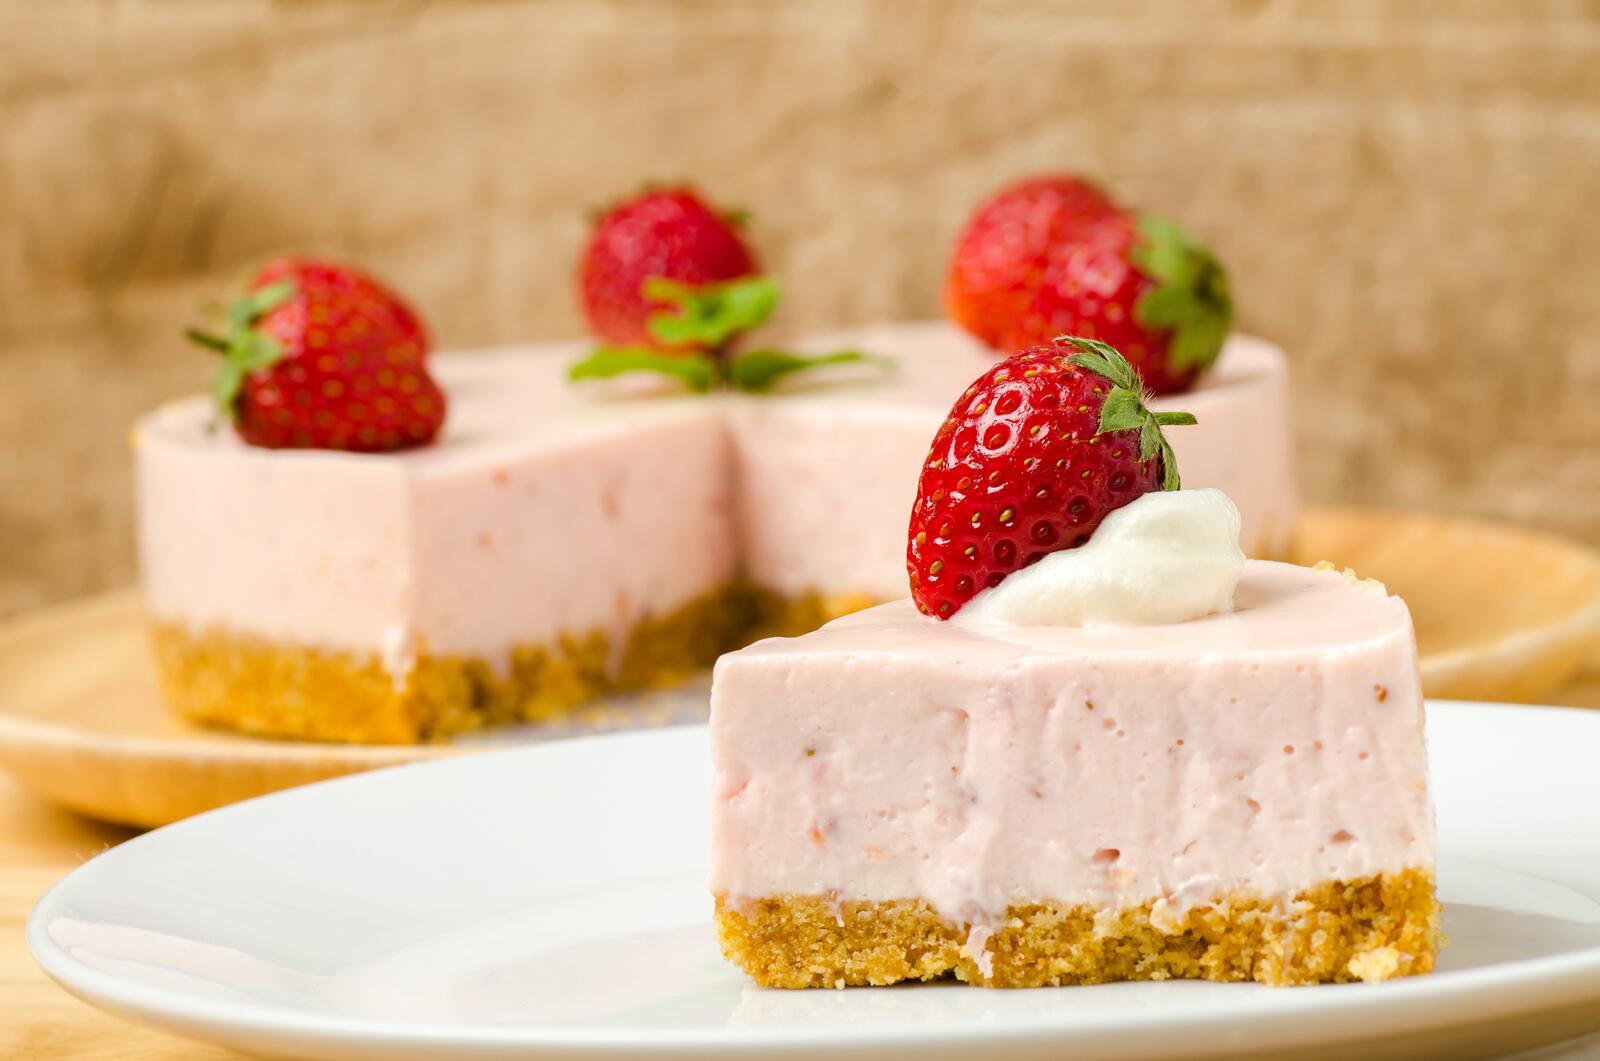 Wallpapers cream strawberry pastry on the desktop